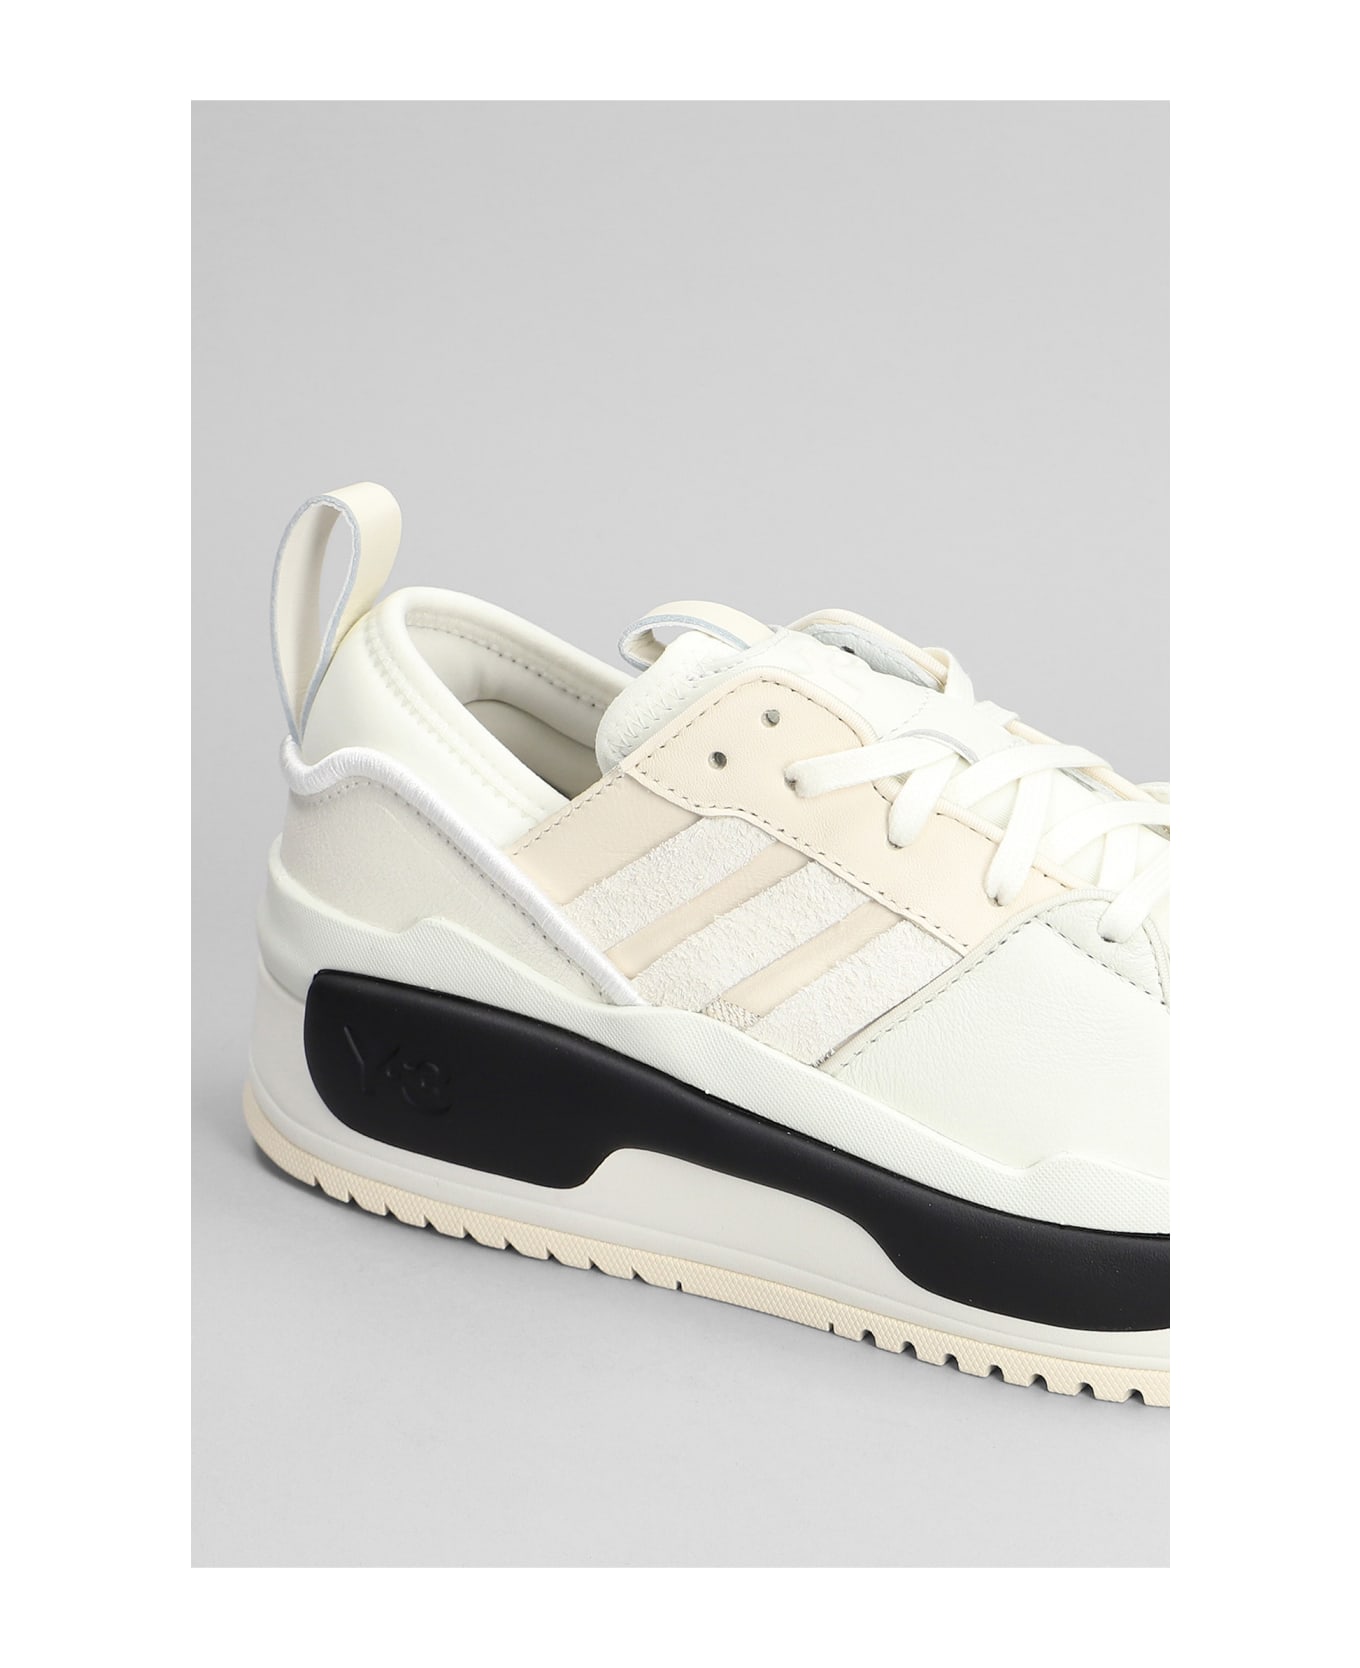 Y-3 Rivalry White Leather Sneakers - OFF WHITE WONDER WHITE (White) スニーカー